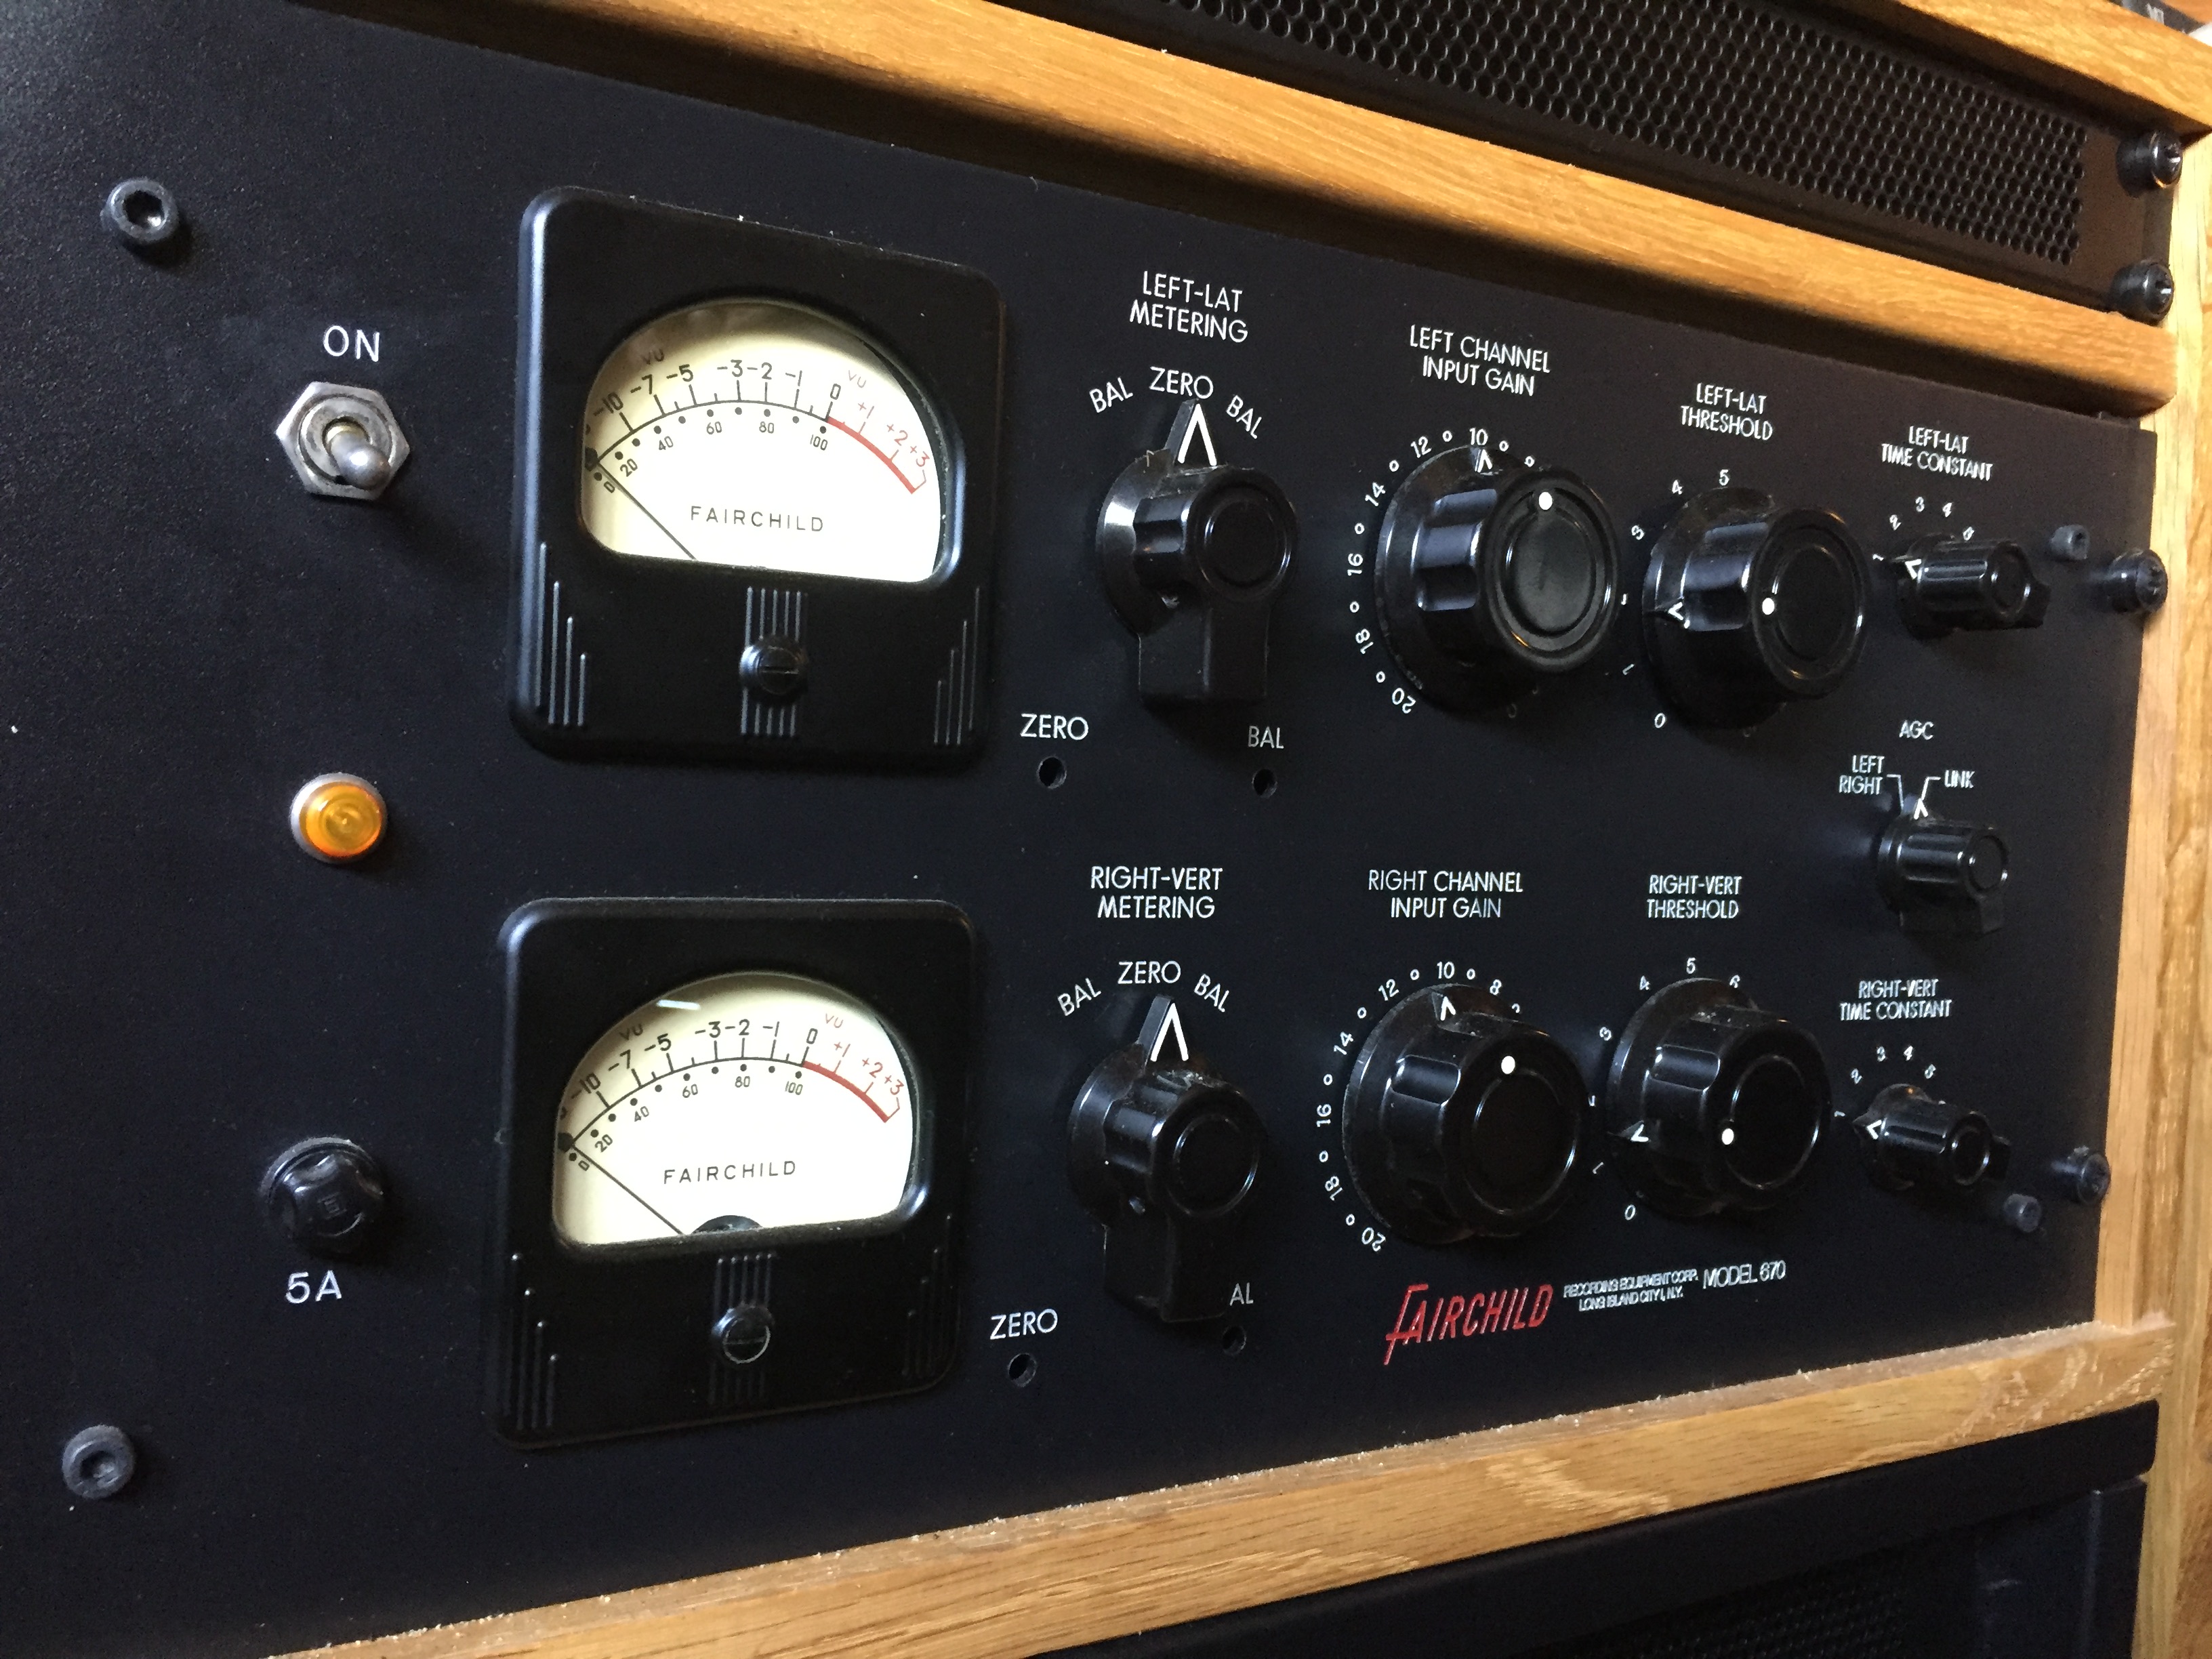 uad fairchild 670 gain staging